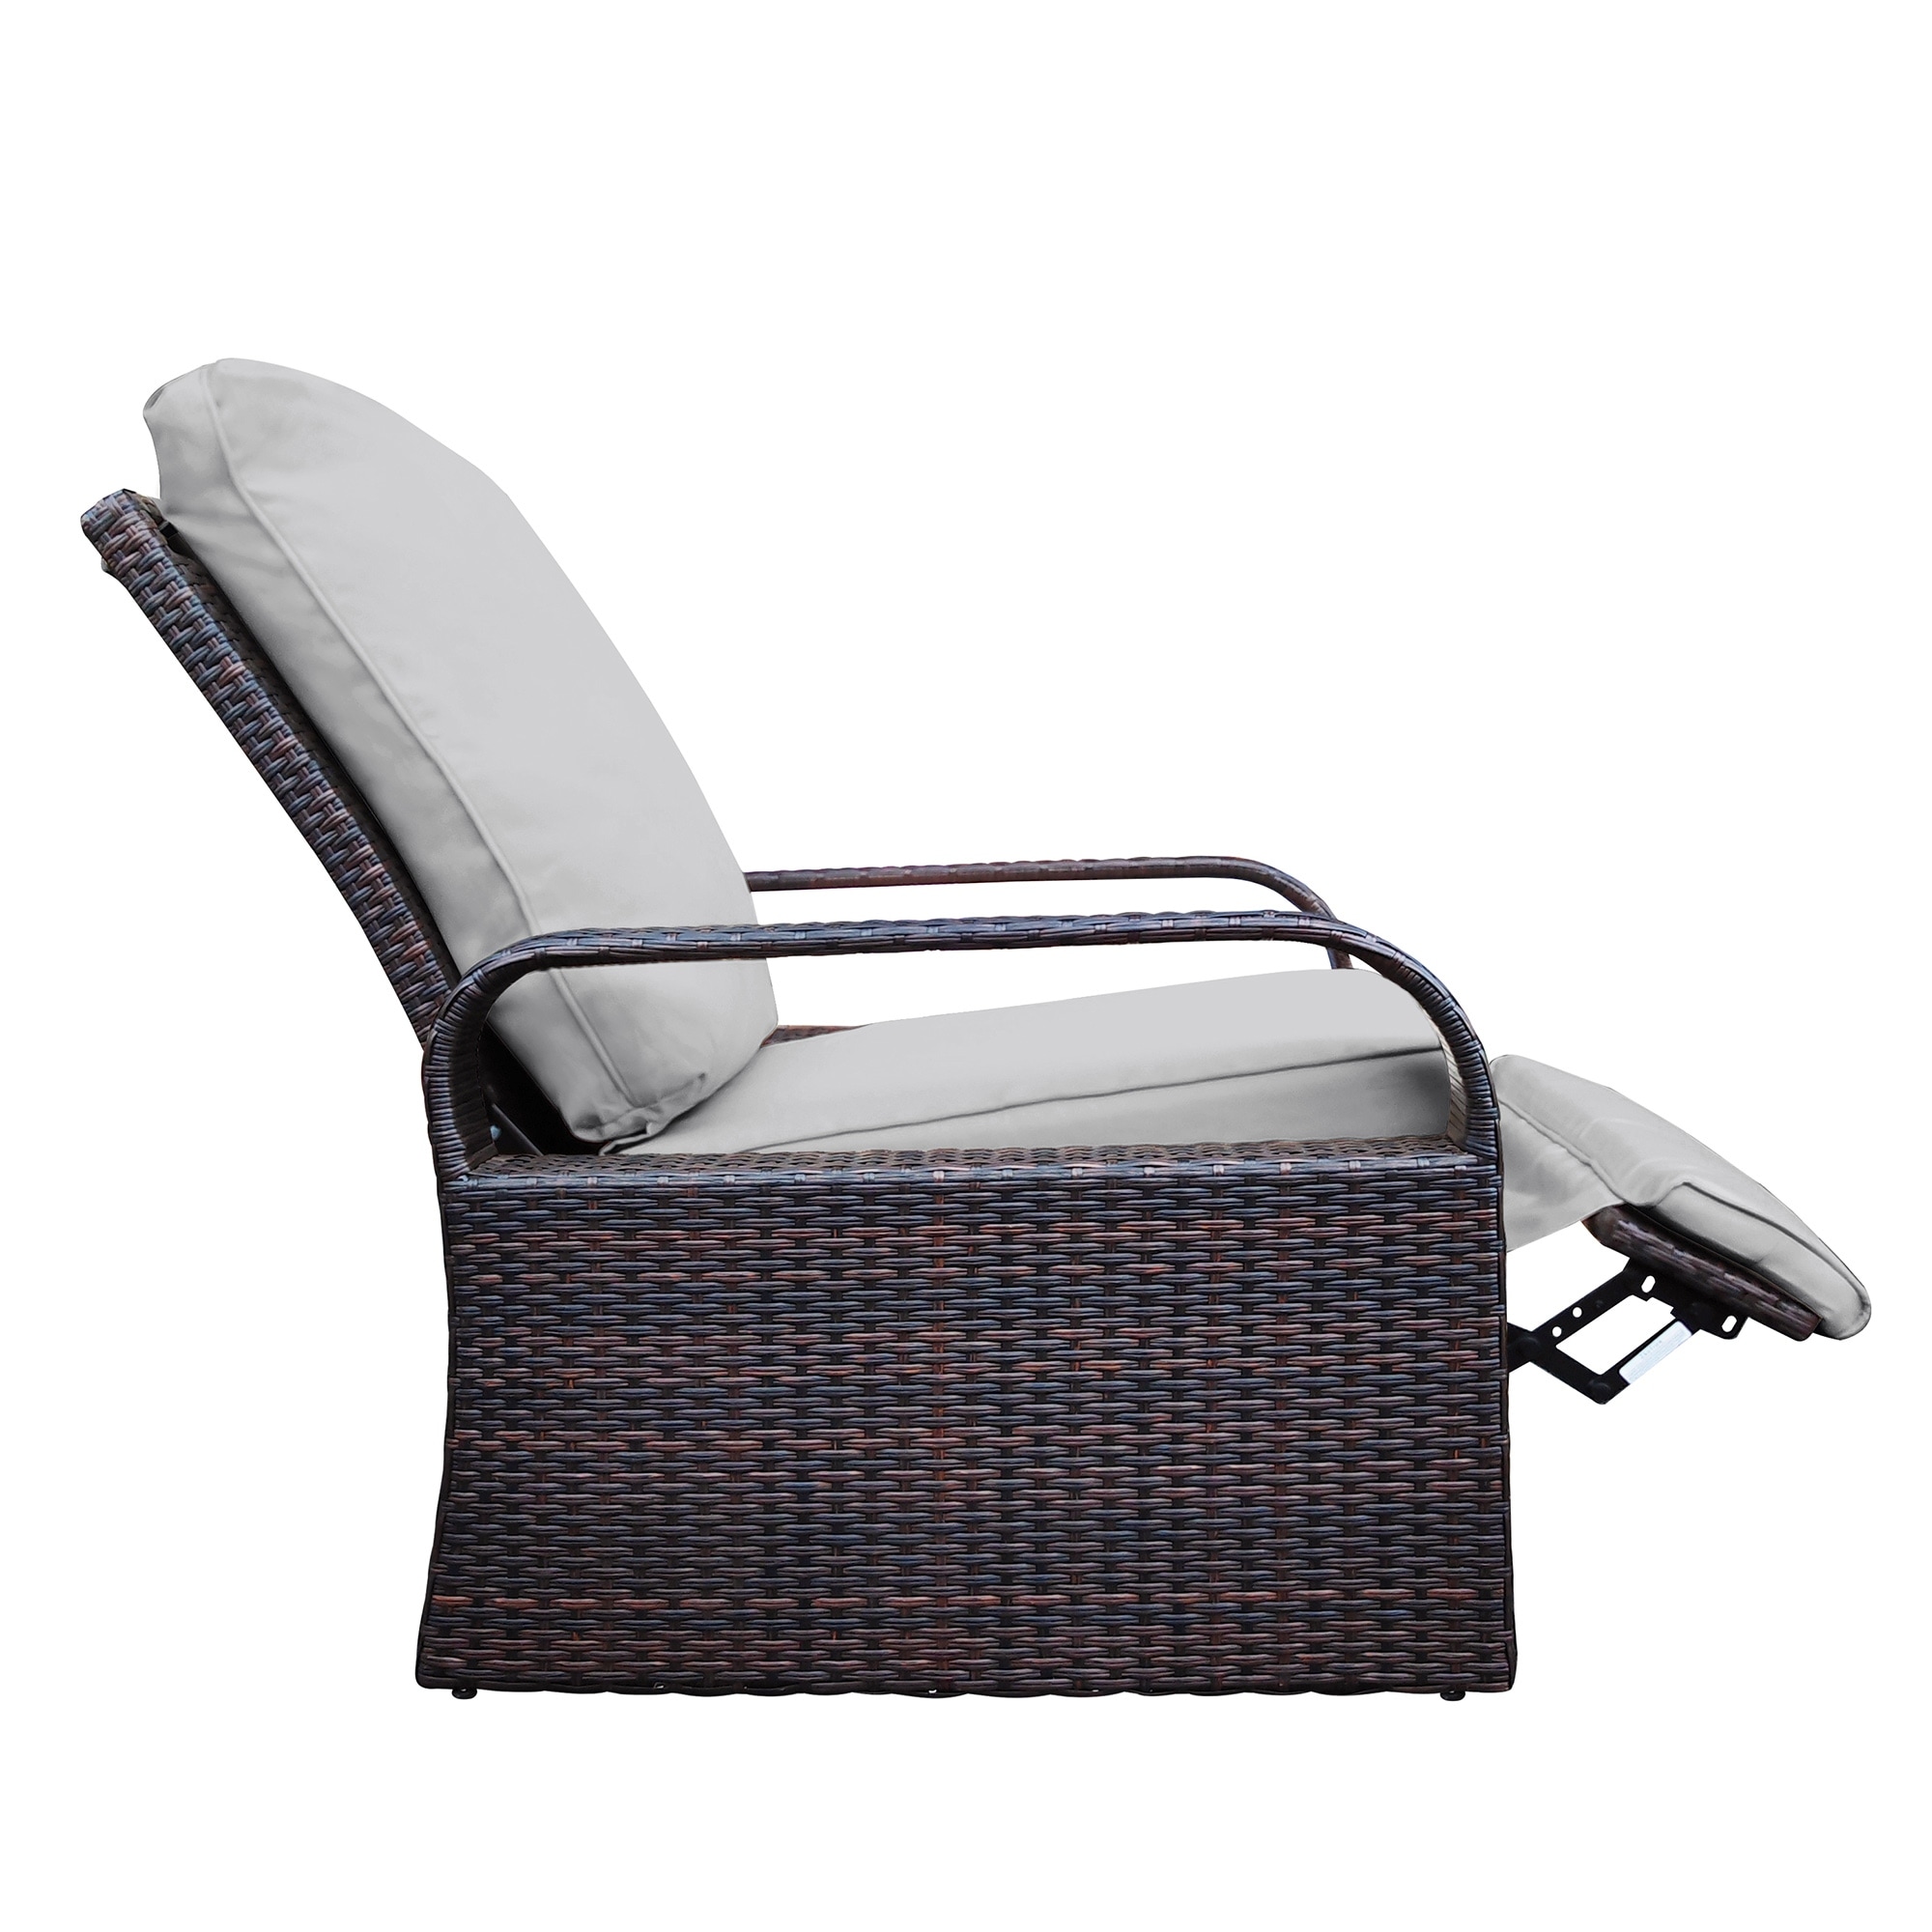 Automatic Adjustable Wicker Lounge Recliner Chair